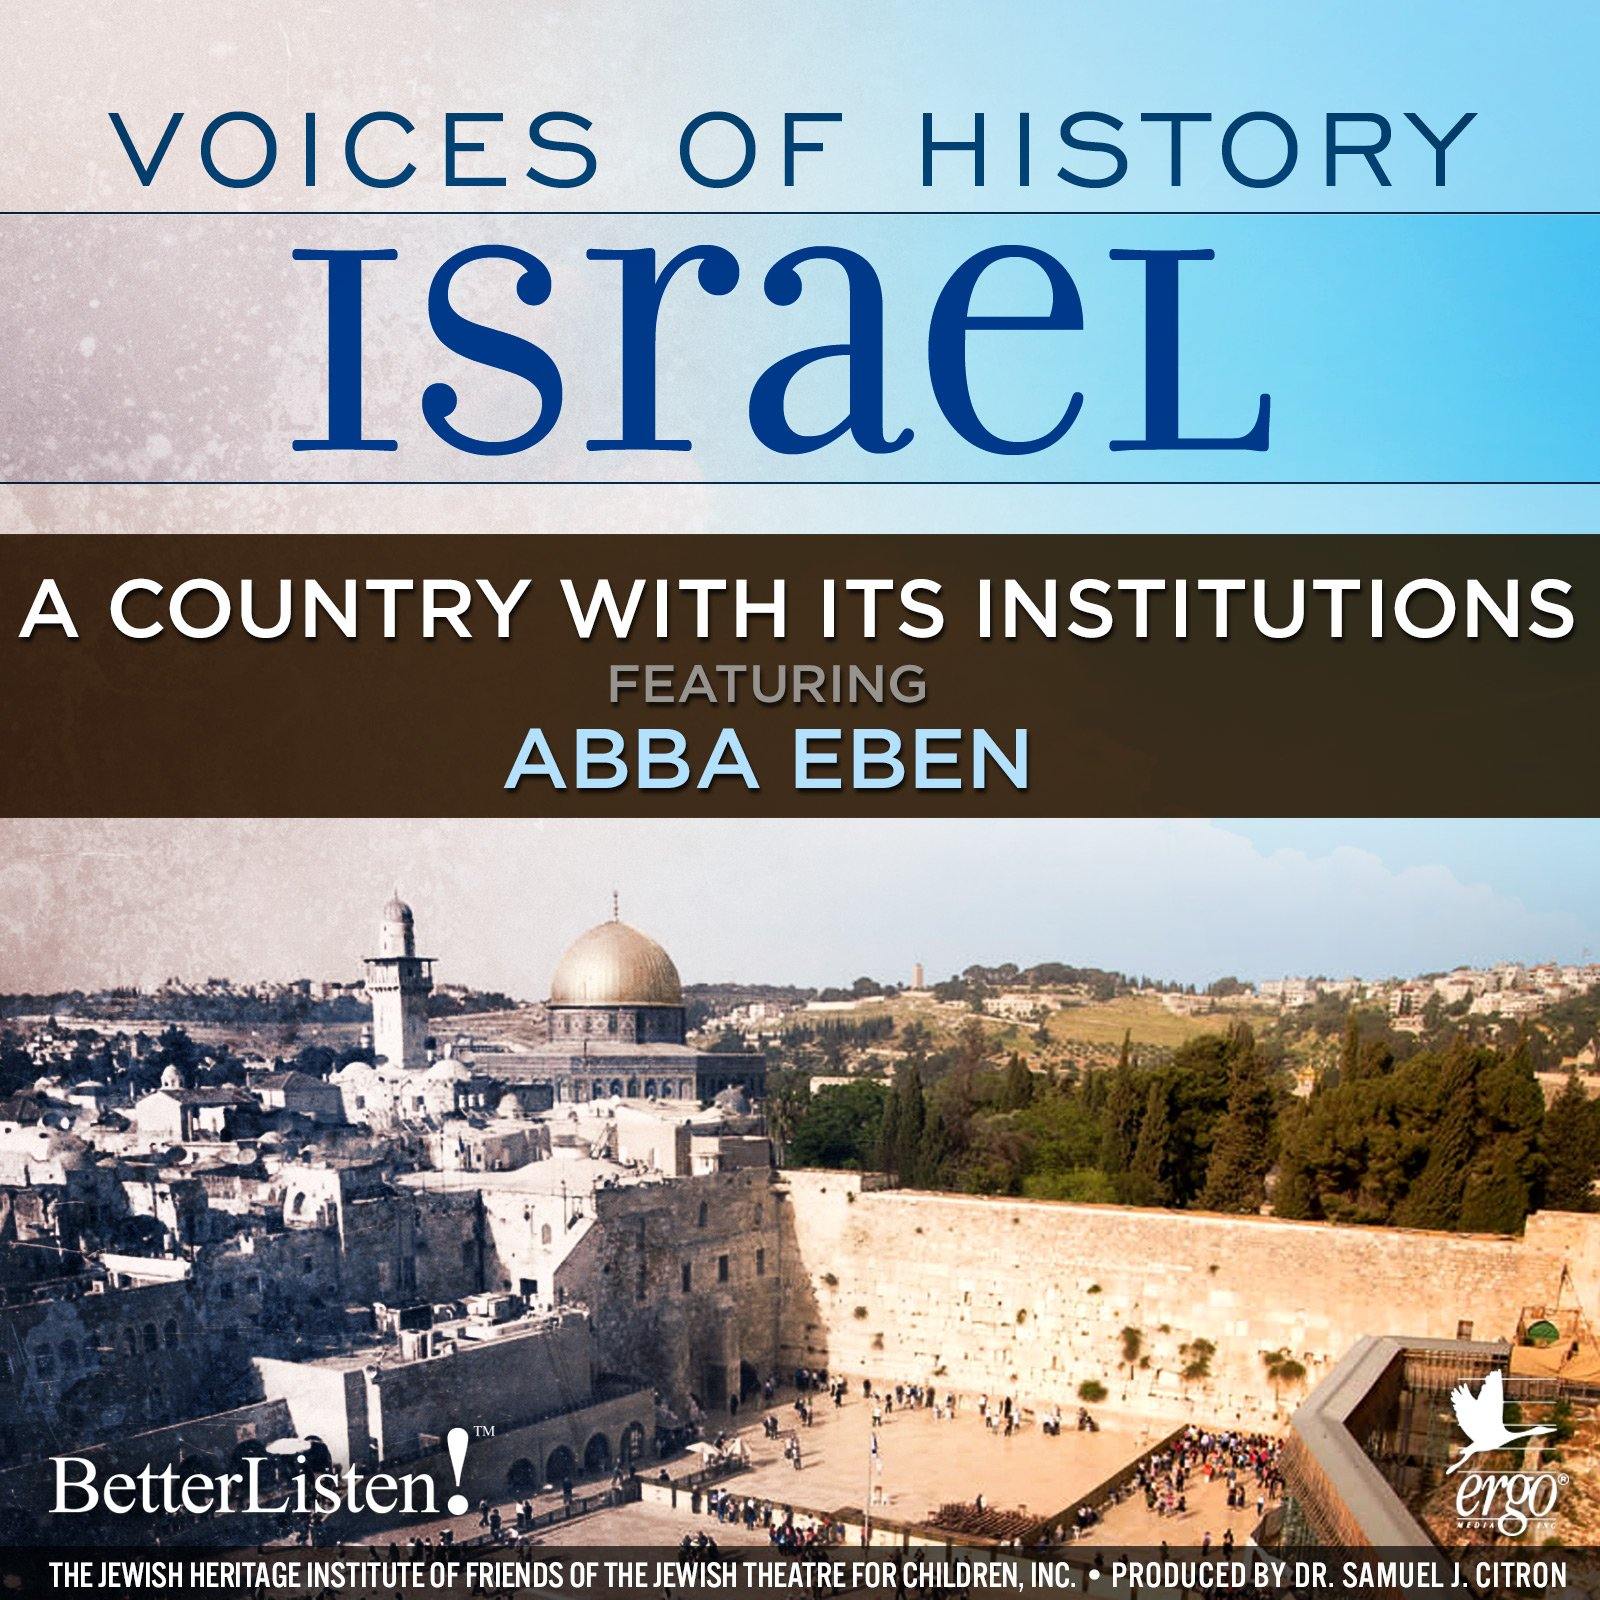 Voices of History Israel: A Country With its Institutions - BetterListen!